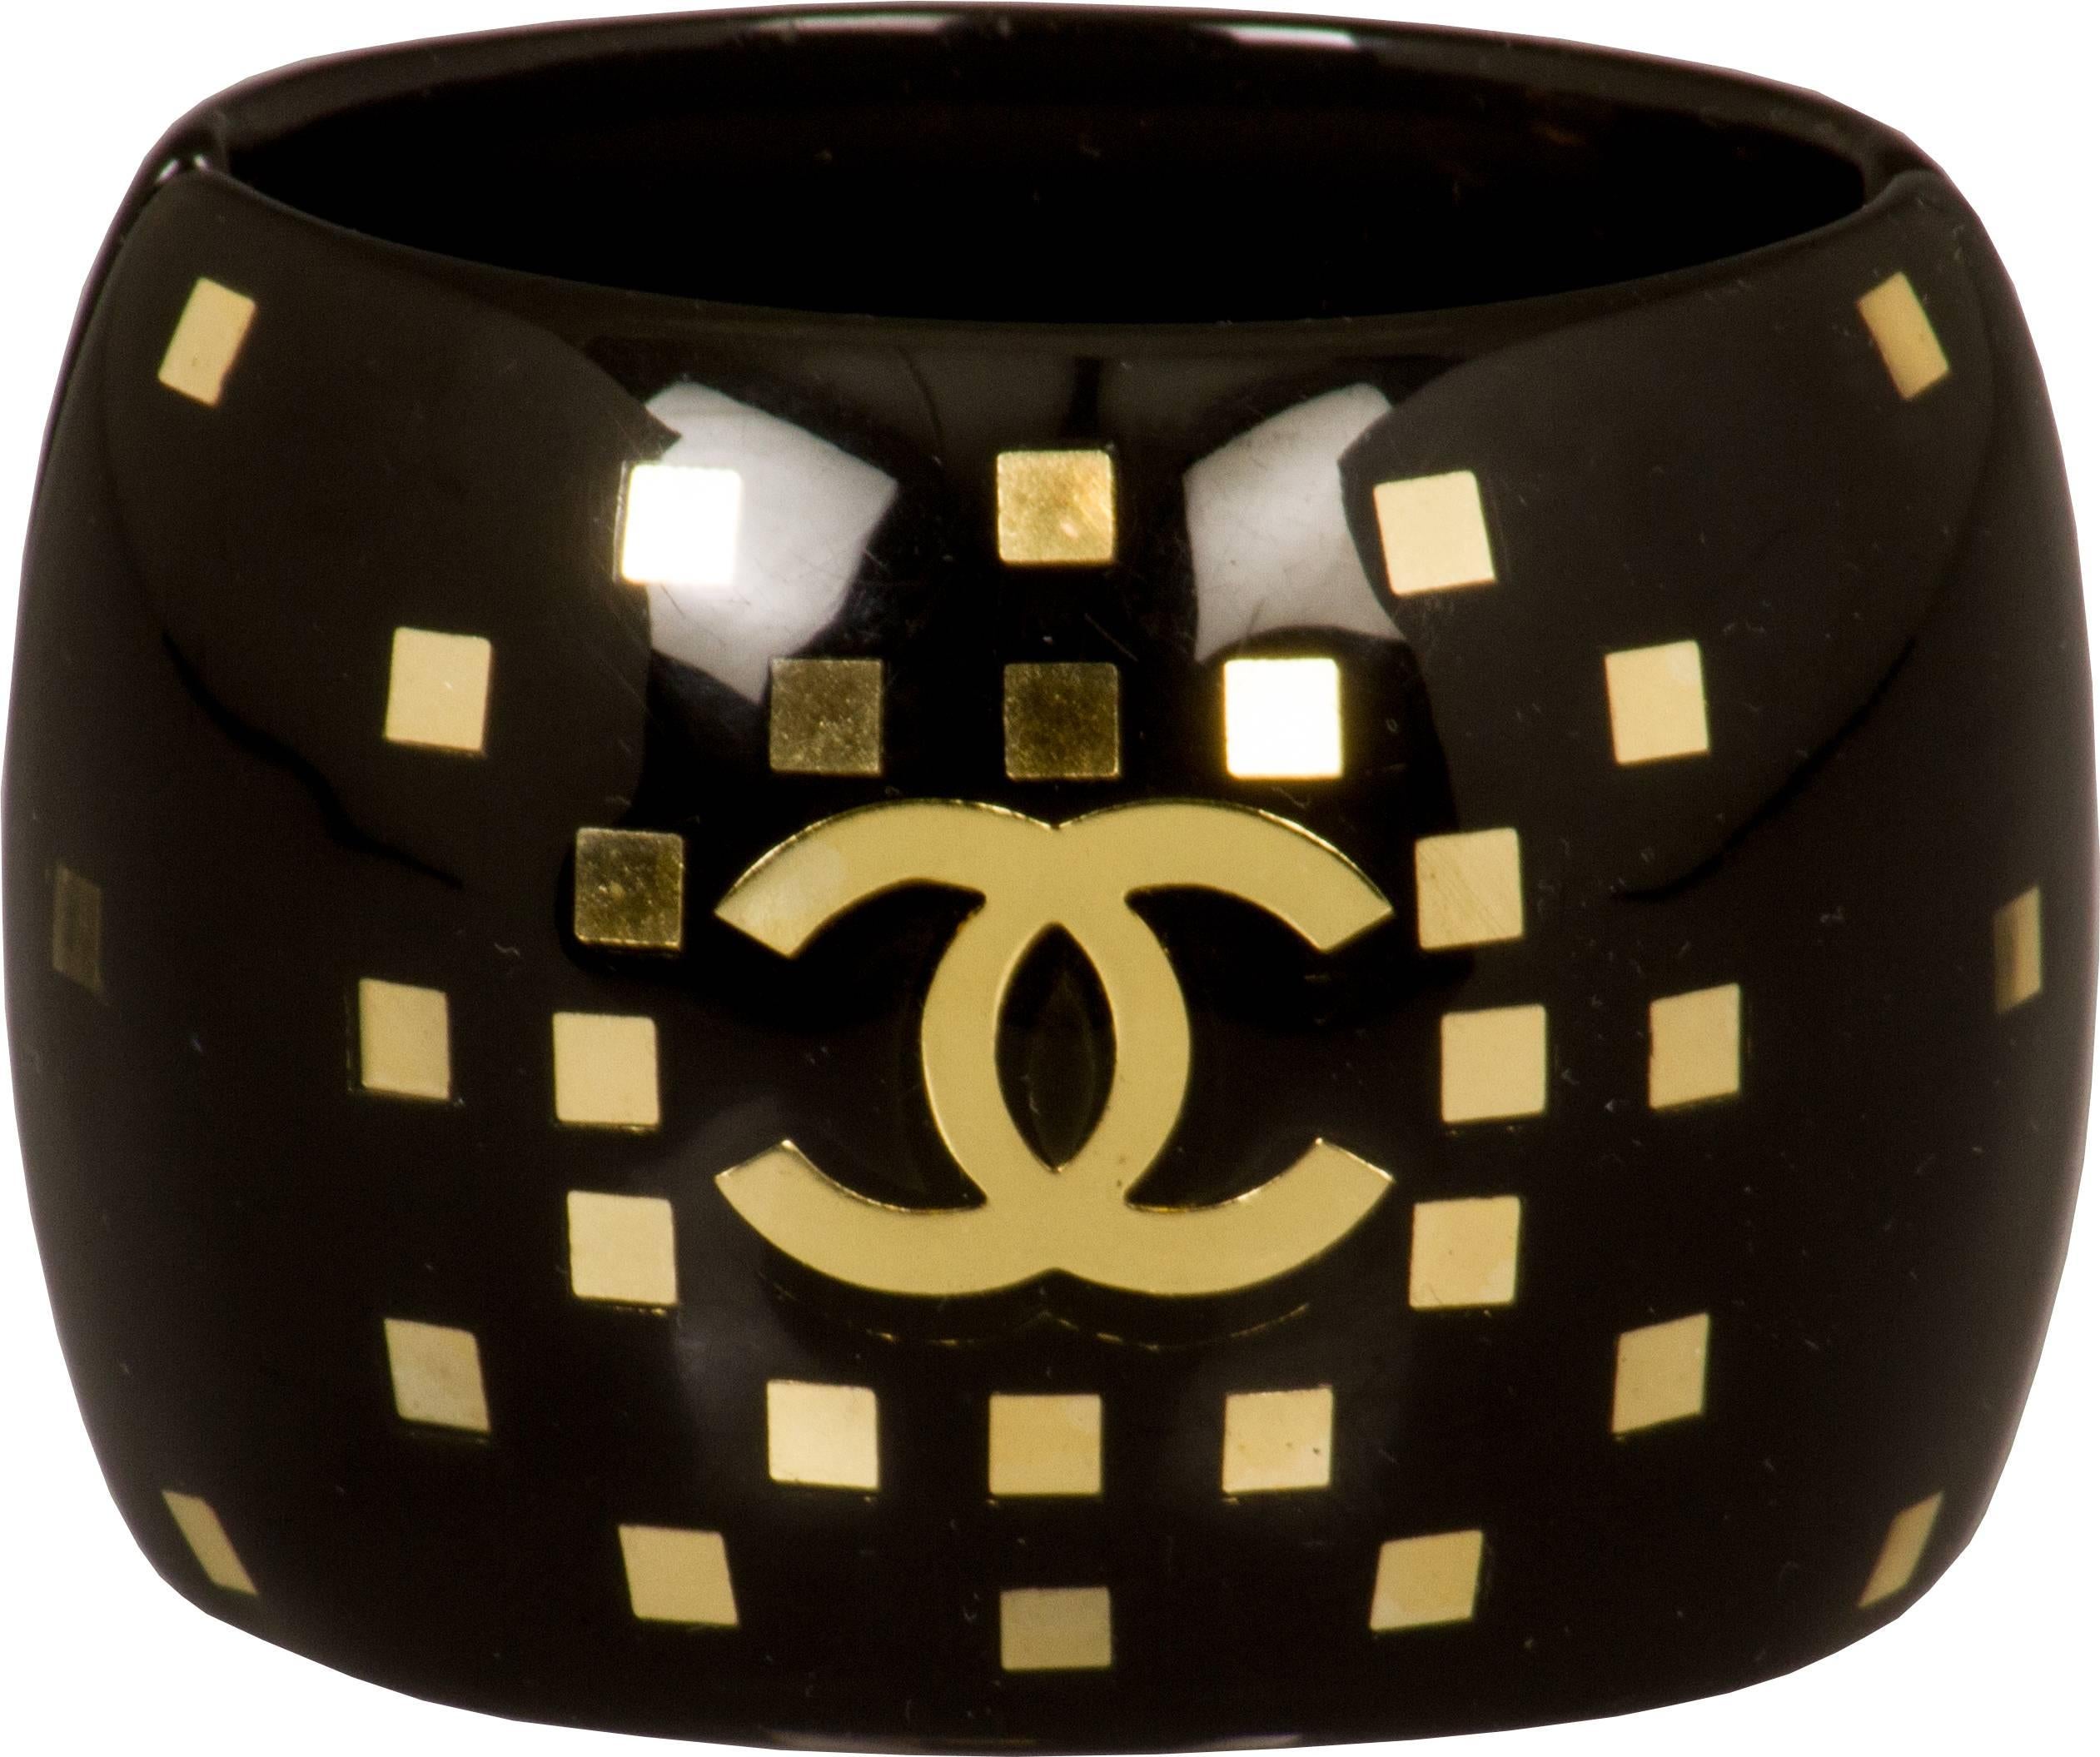 This is a handsome CHANEL logo bracelet accented with gold dating  to the Autumn 2001 collection.